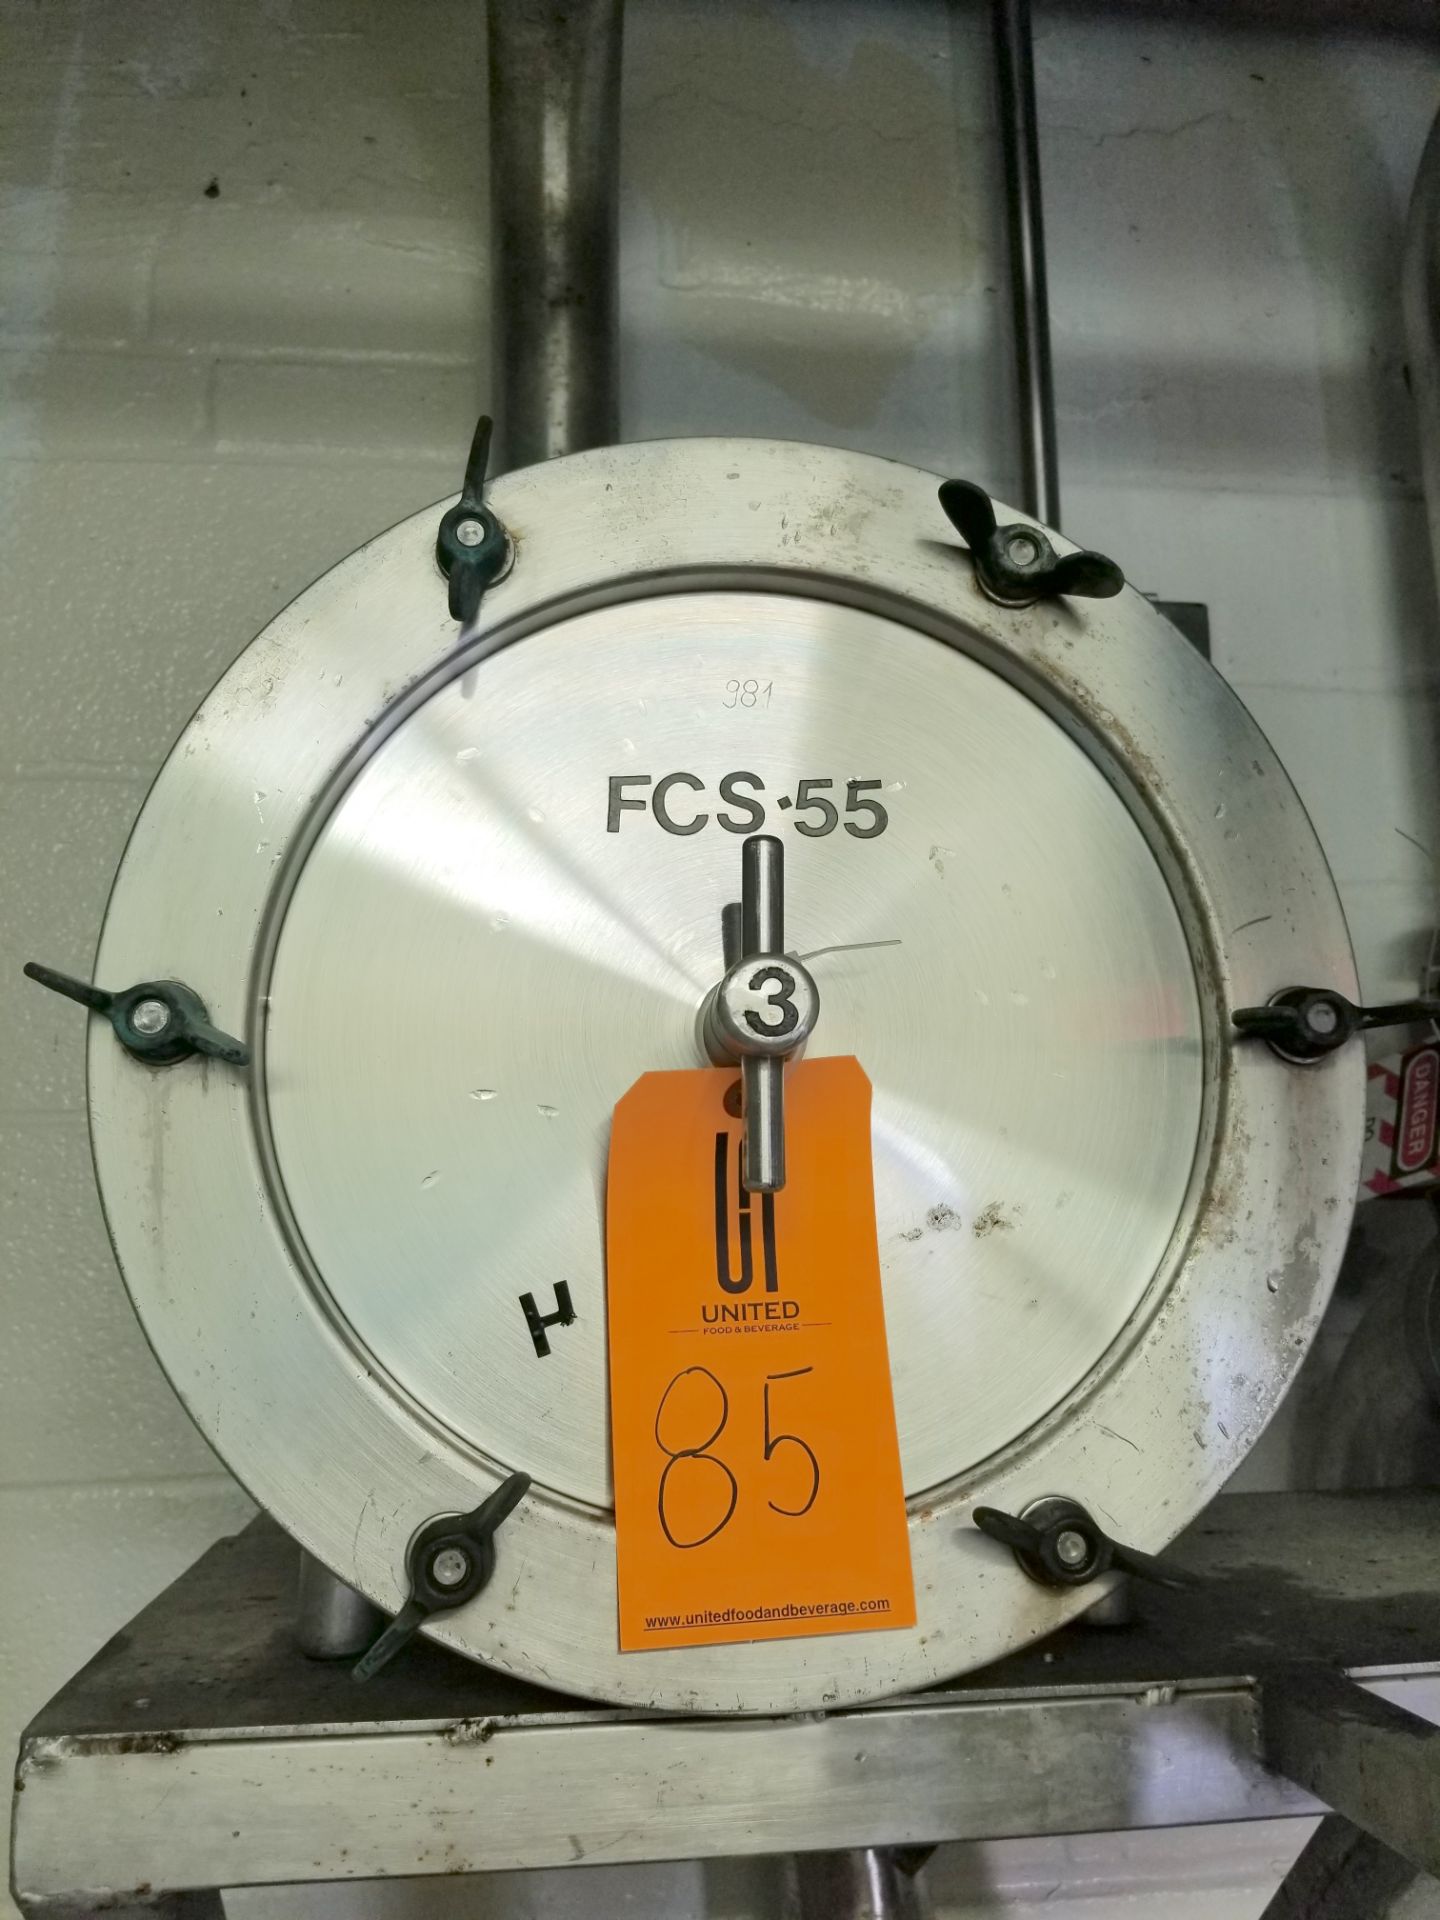 HCFS-55 Corn Syrup Flow Meter 3 Inch Connections